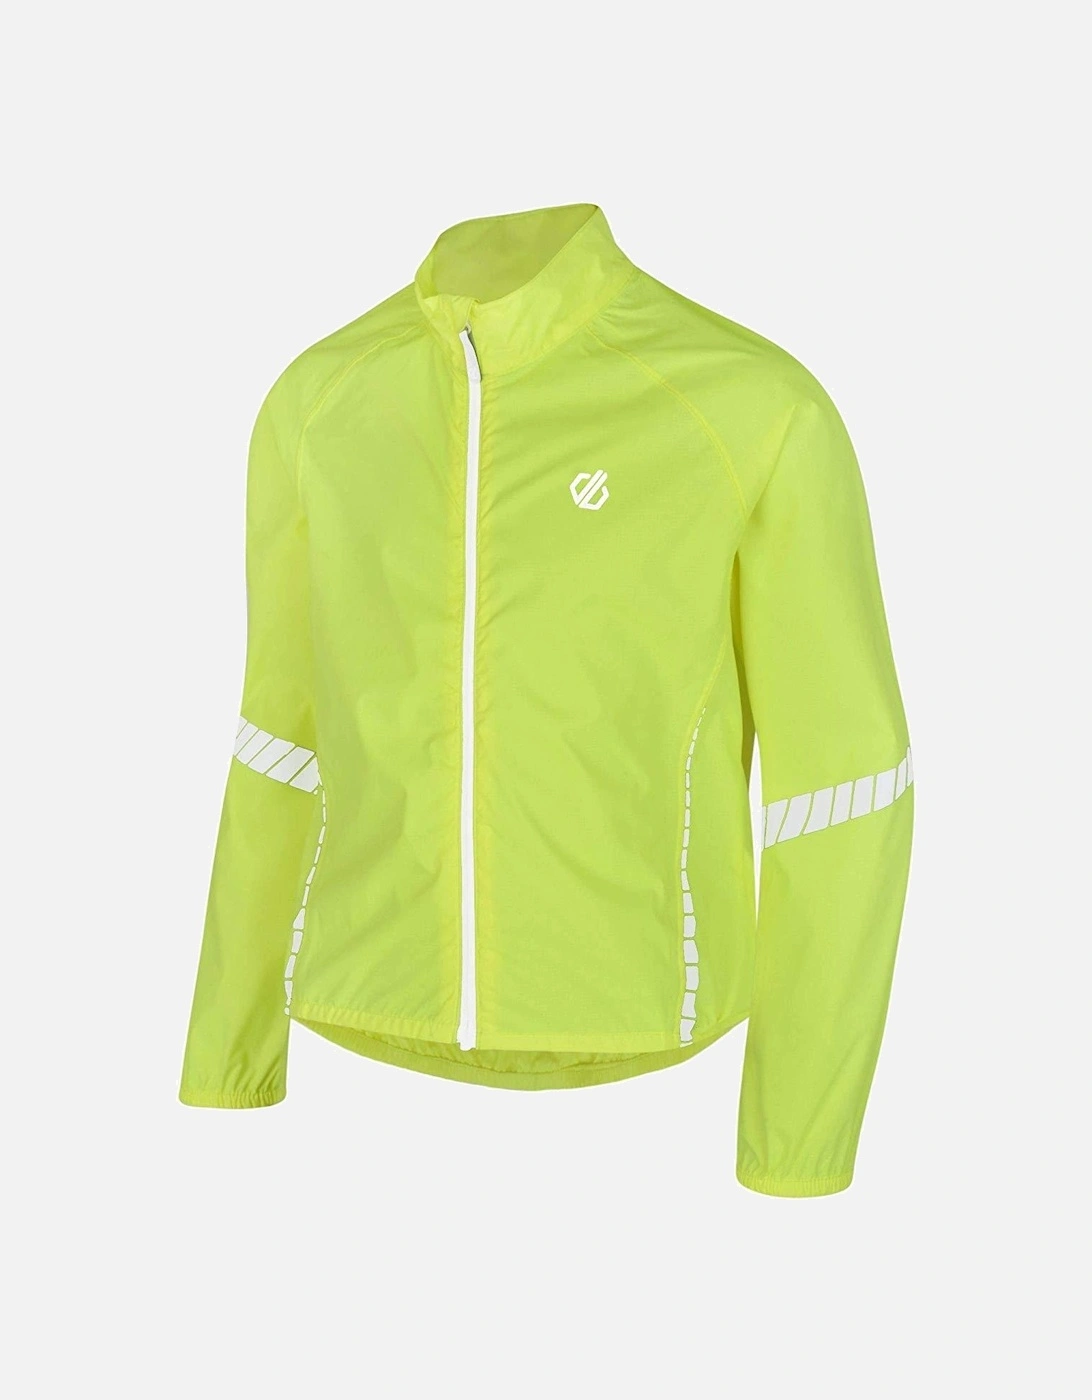 Childrens/Kids Cordial Reflective Cycling Shell Jacket